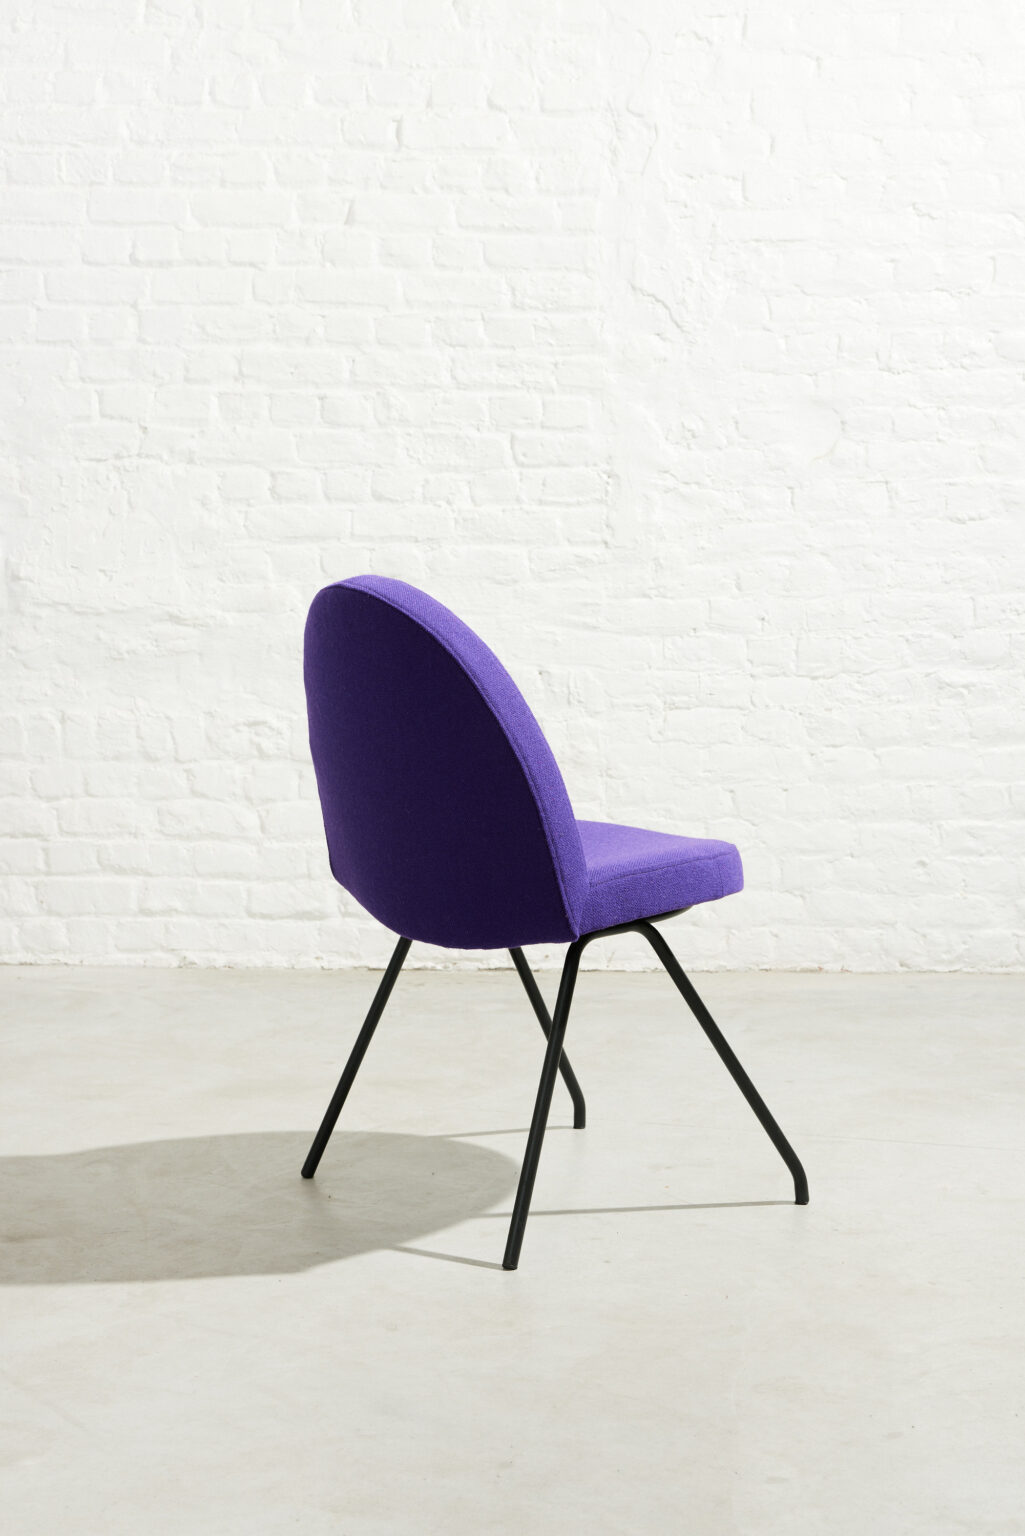 Chair "No.771 or "Tongue by Joseph André Motte